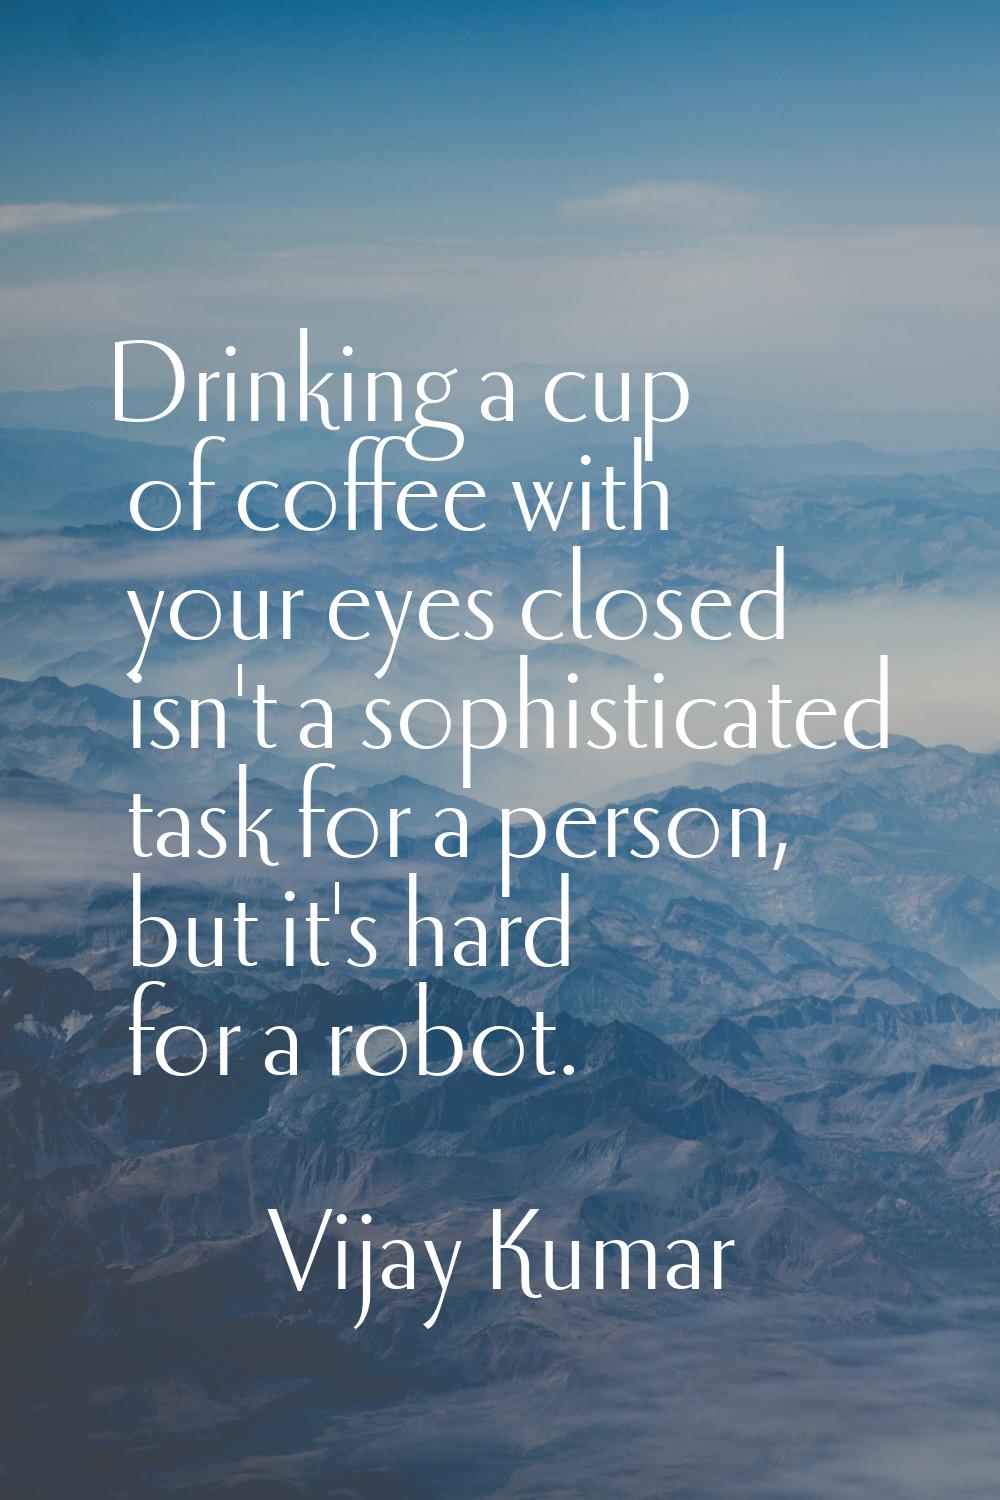 Drinking a cup of coffee with your eyes closed isn't a sophisticated task for a person, but it's ha